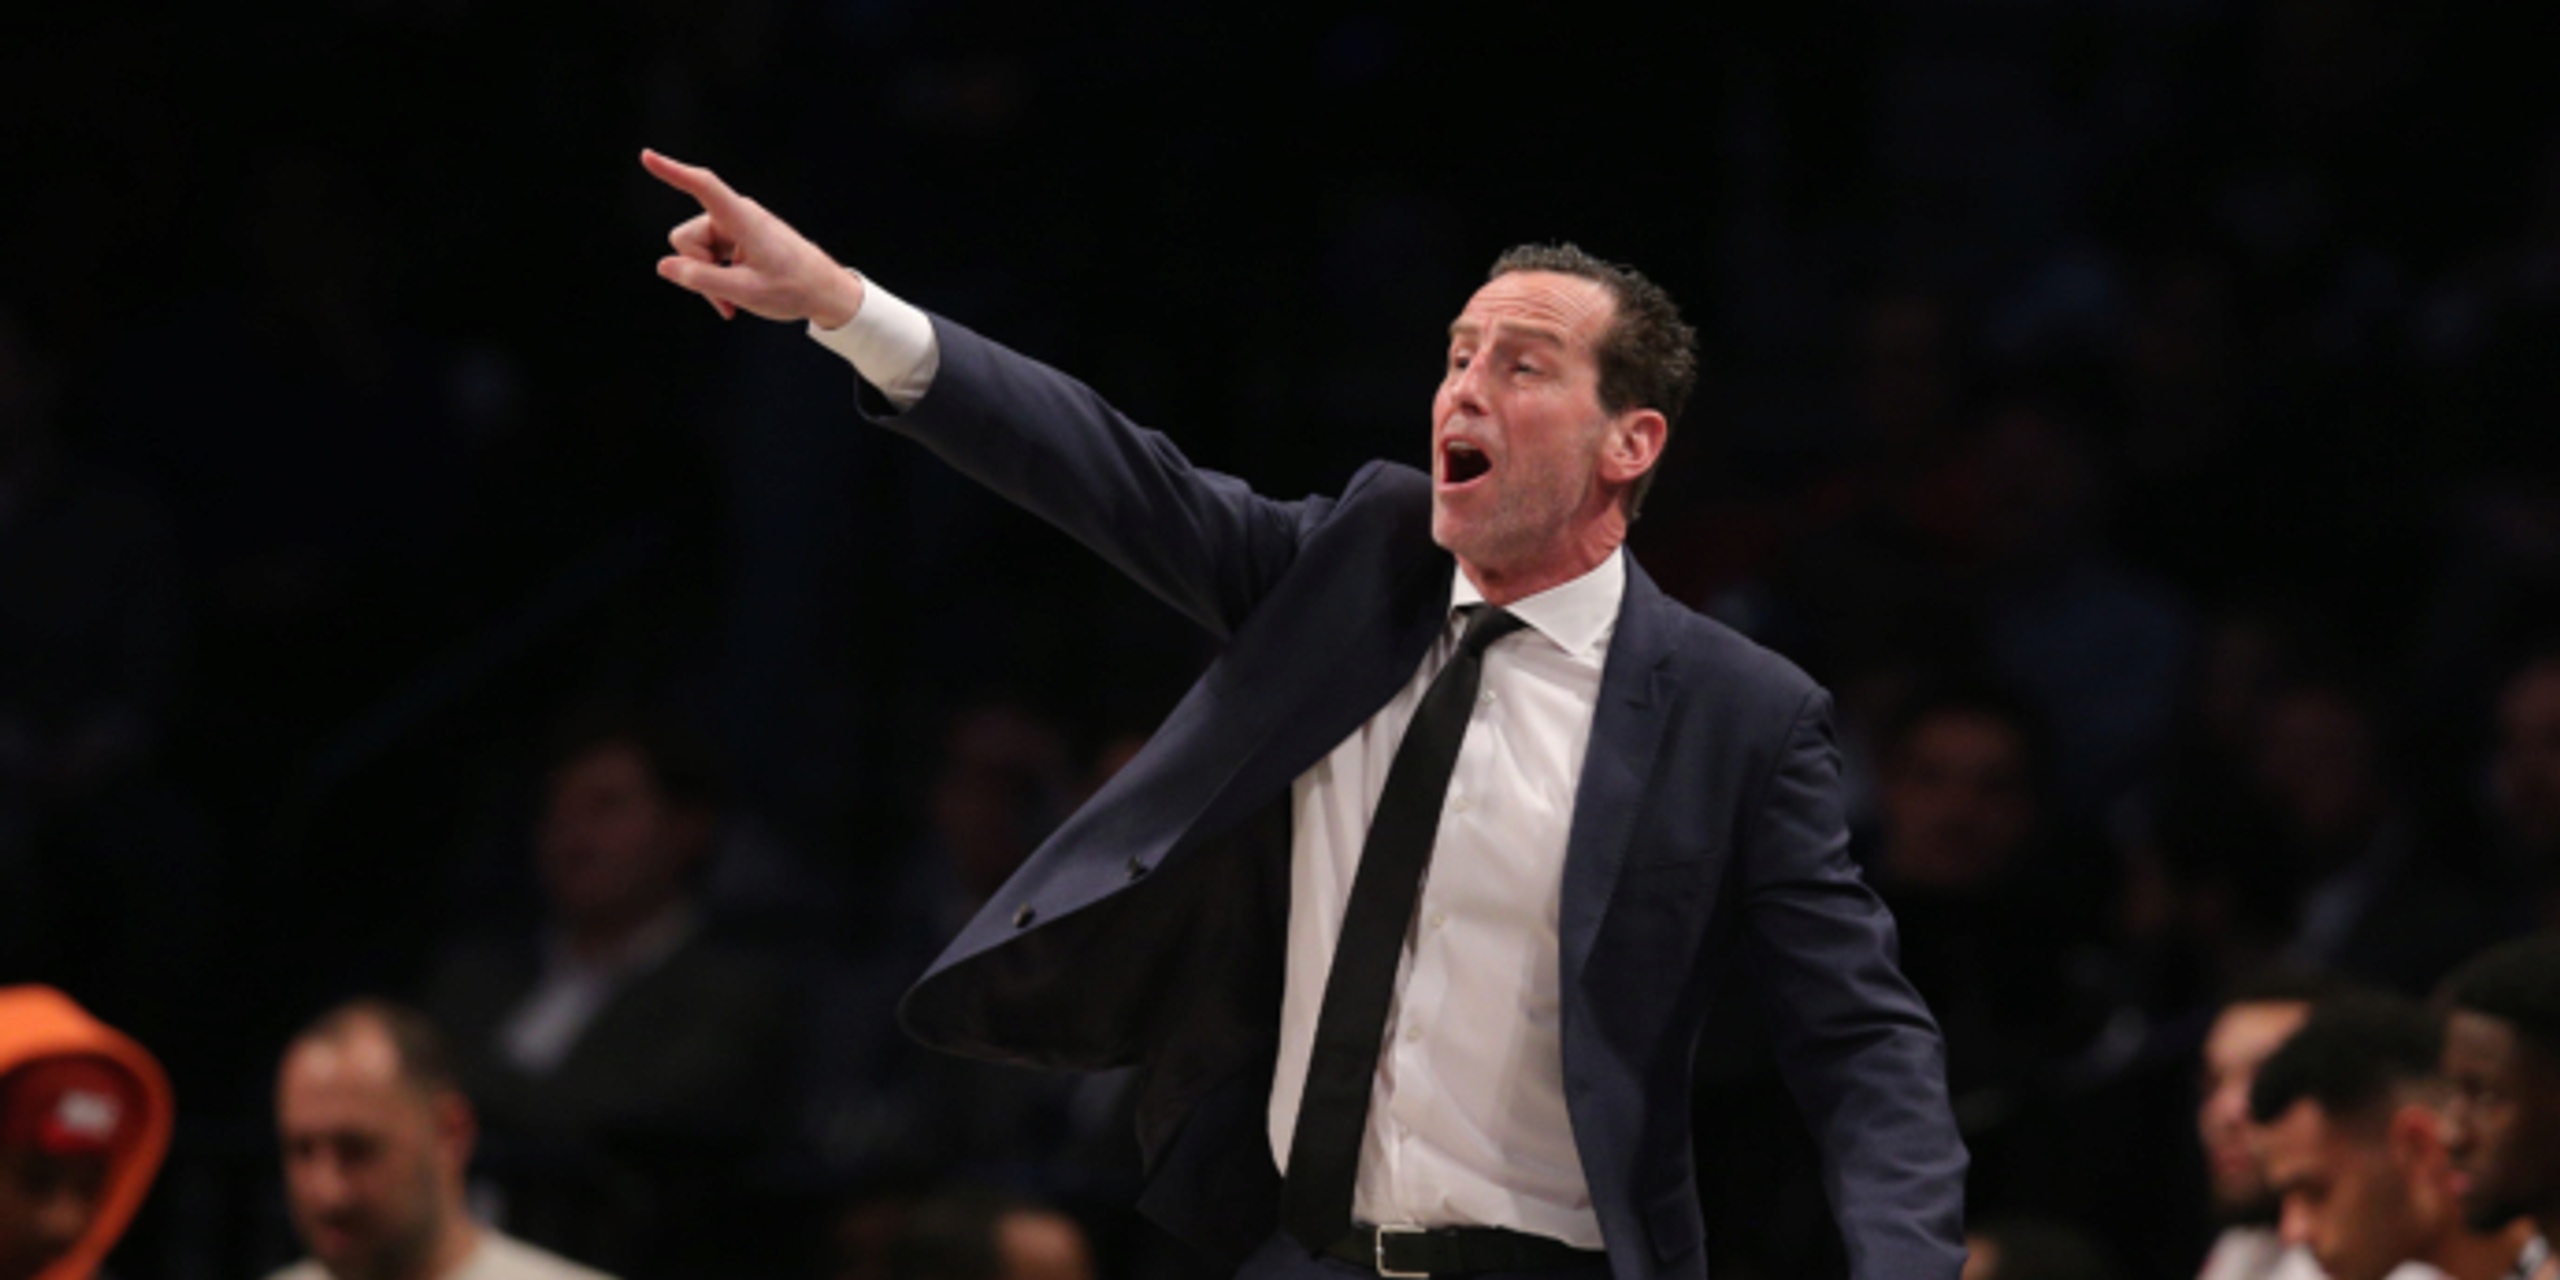 Kenny Atkinson changes mind, passes on Hornets'  head coaching job